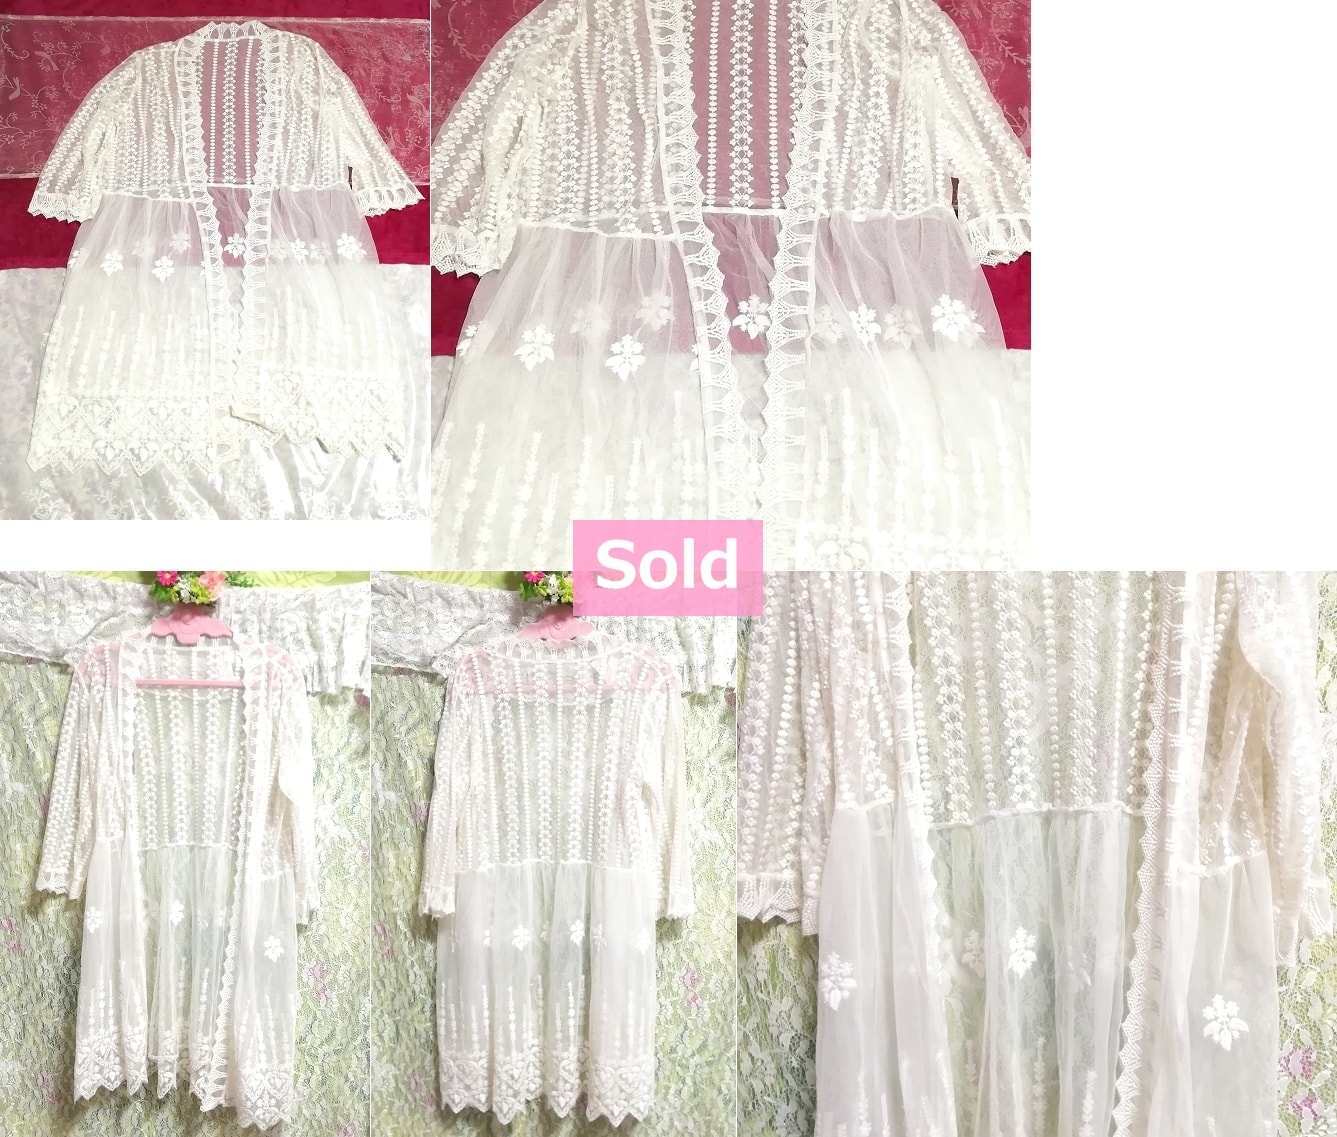 White lace floral pattern embroidery / see through cardigan